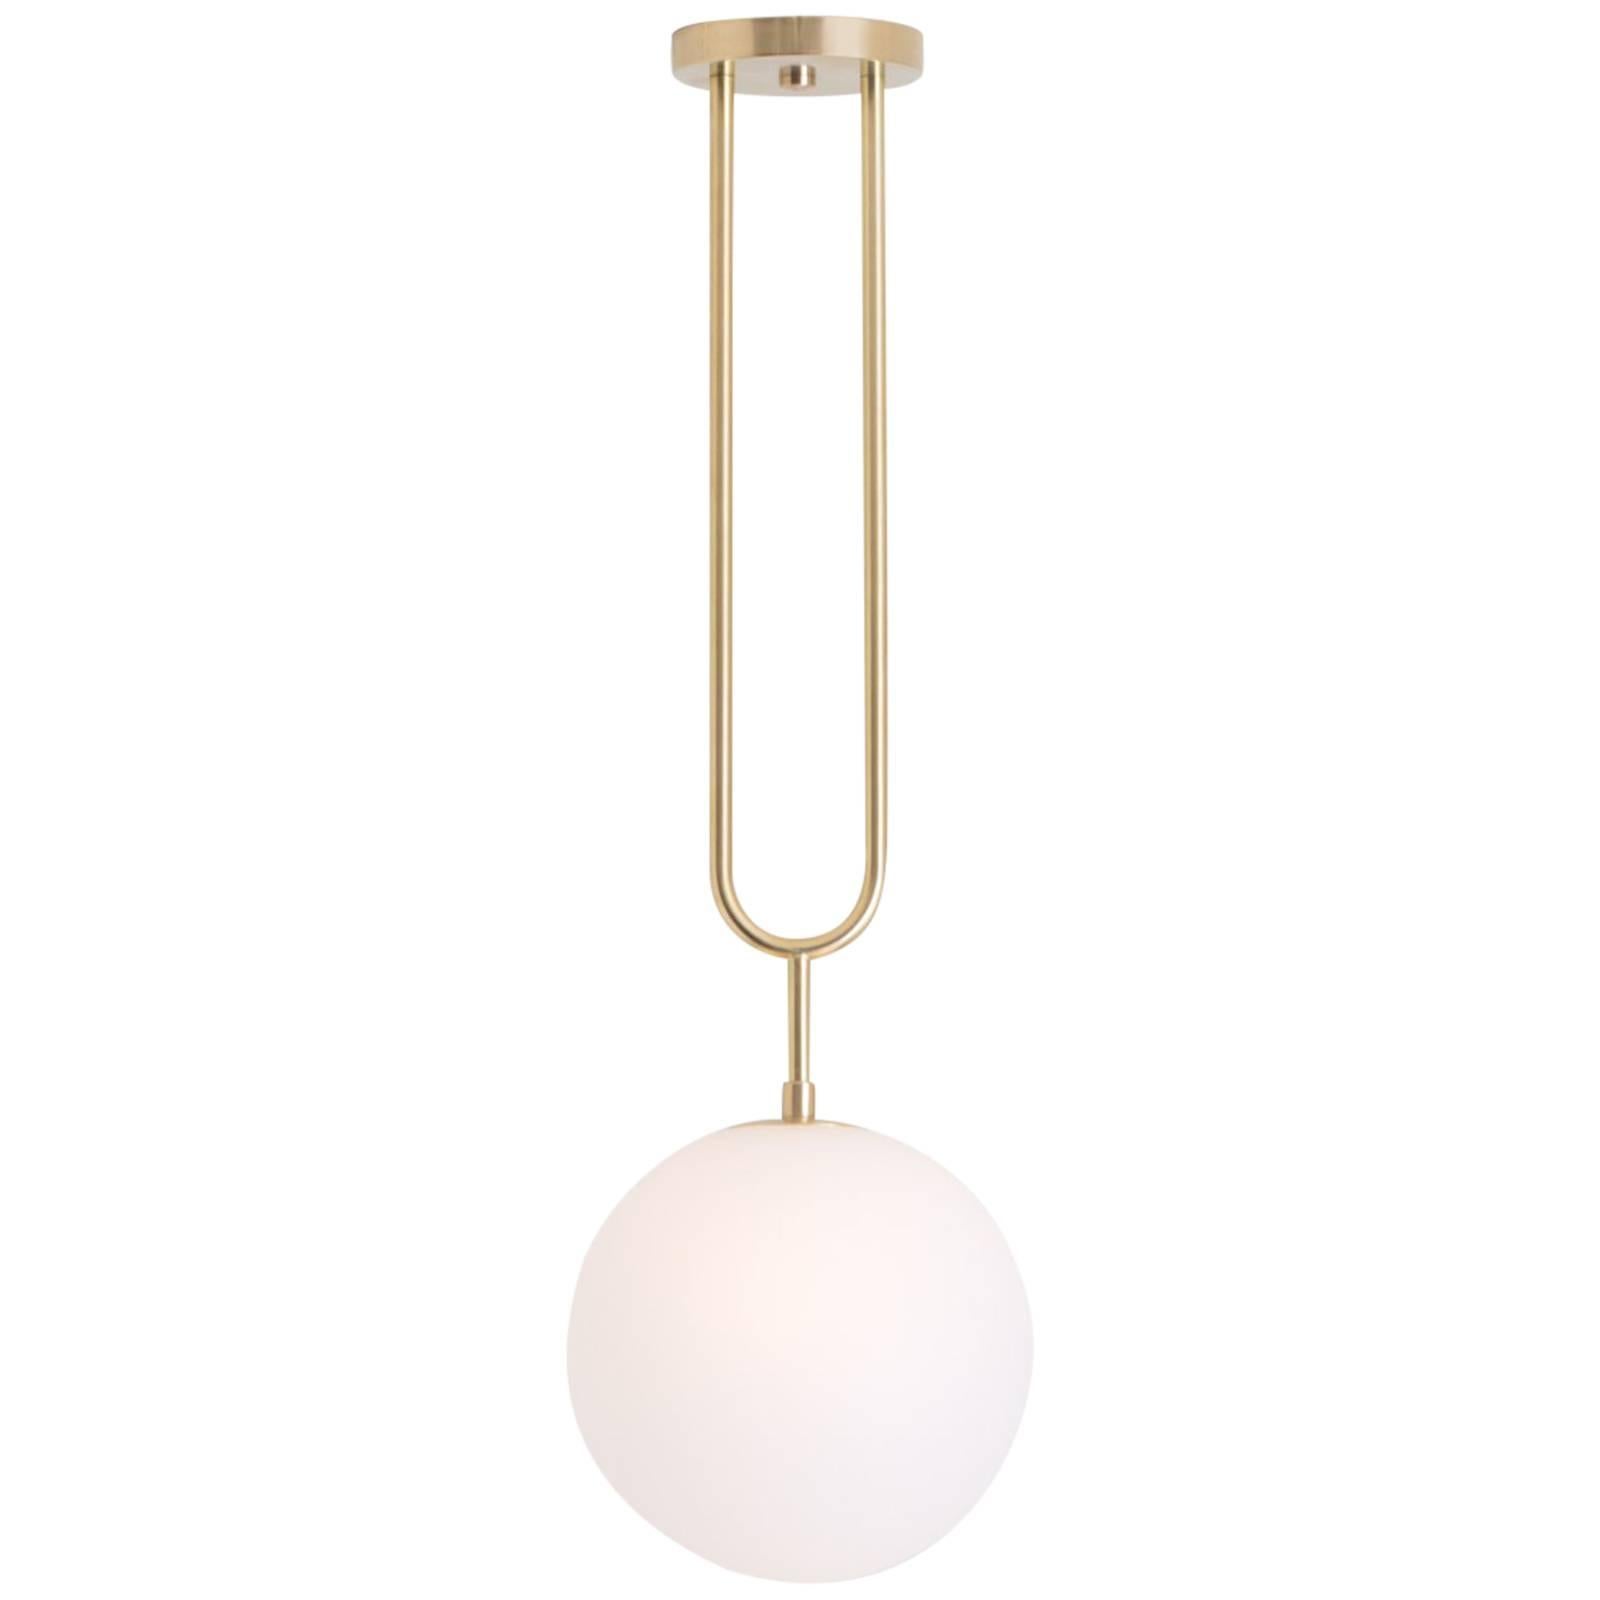 American Koko, a Modern Pendant Light with Satin Globe Shade in Matte Black and Wood